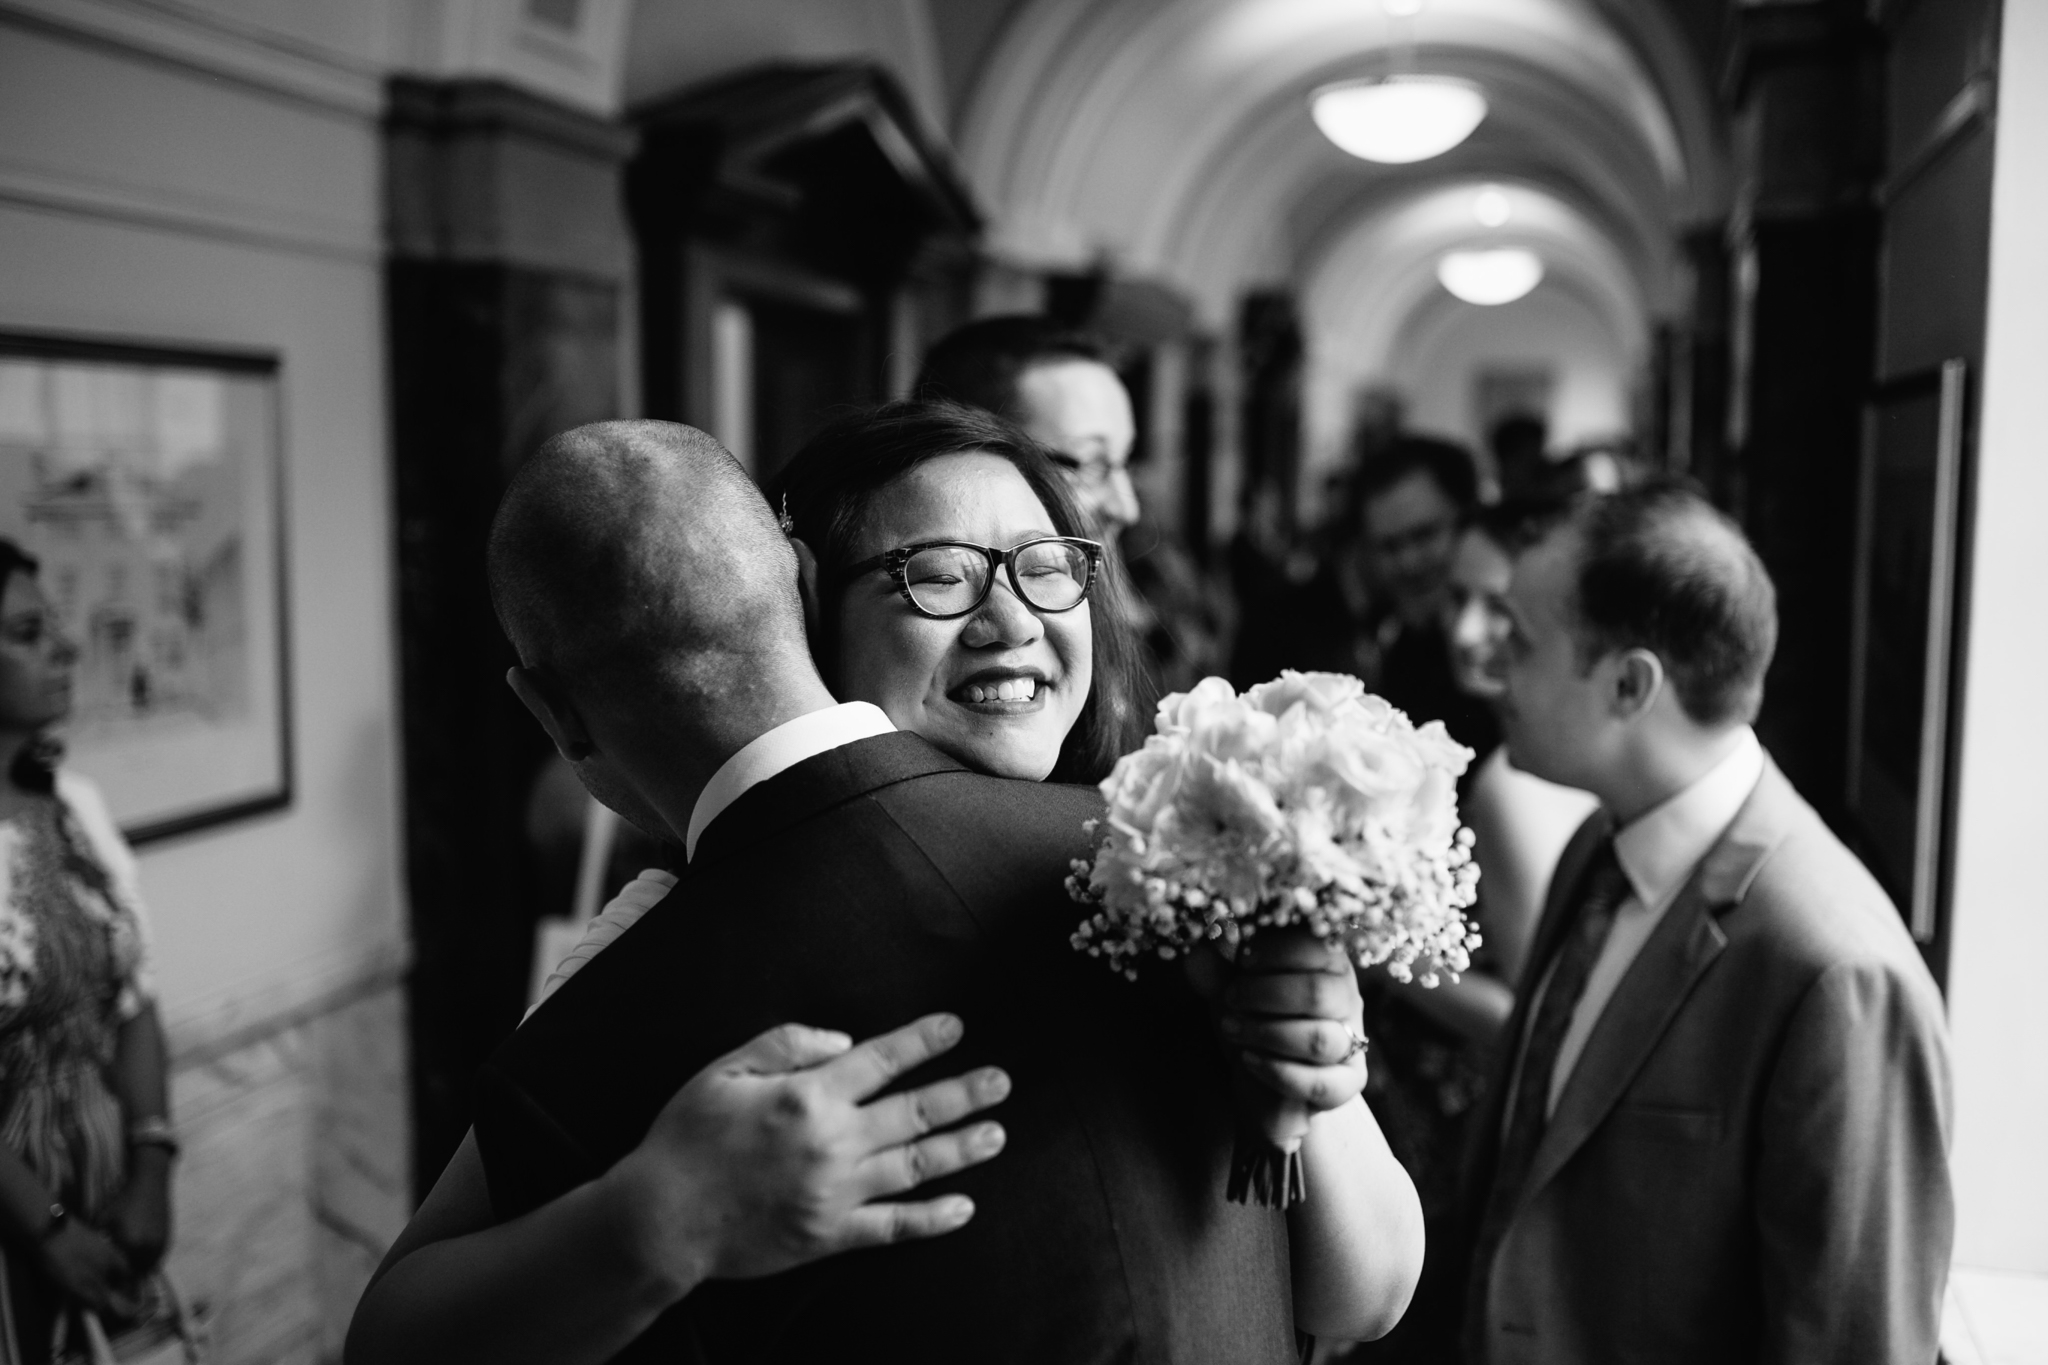 wedding photographer in london islington town hall - first look between bride and groom ceremony photos